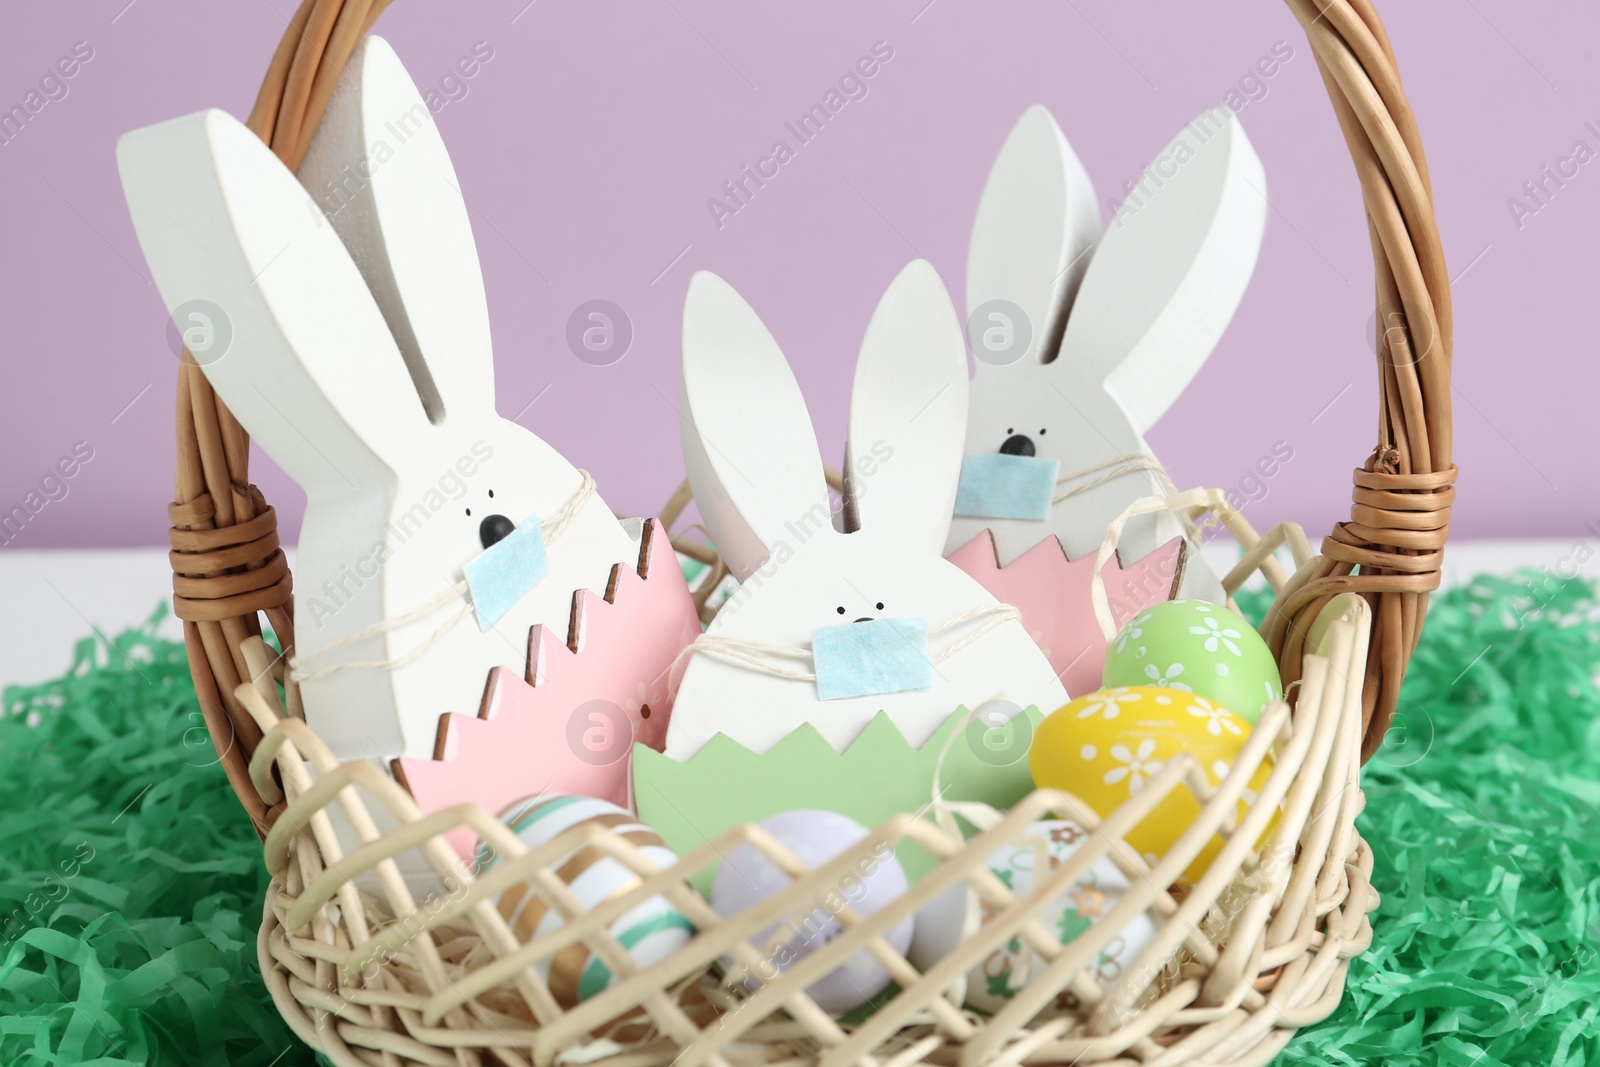 Photo of Wooden bunnies with protective masks and painted eggs in basket on paper grass, closeup. Easter holiday during COVID-19 quarantine